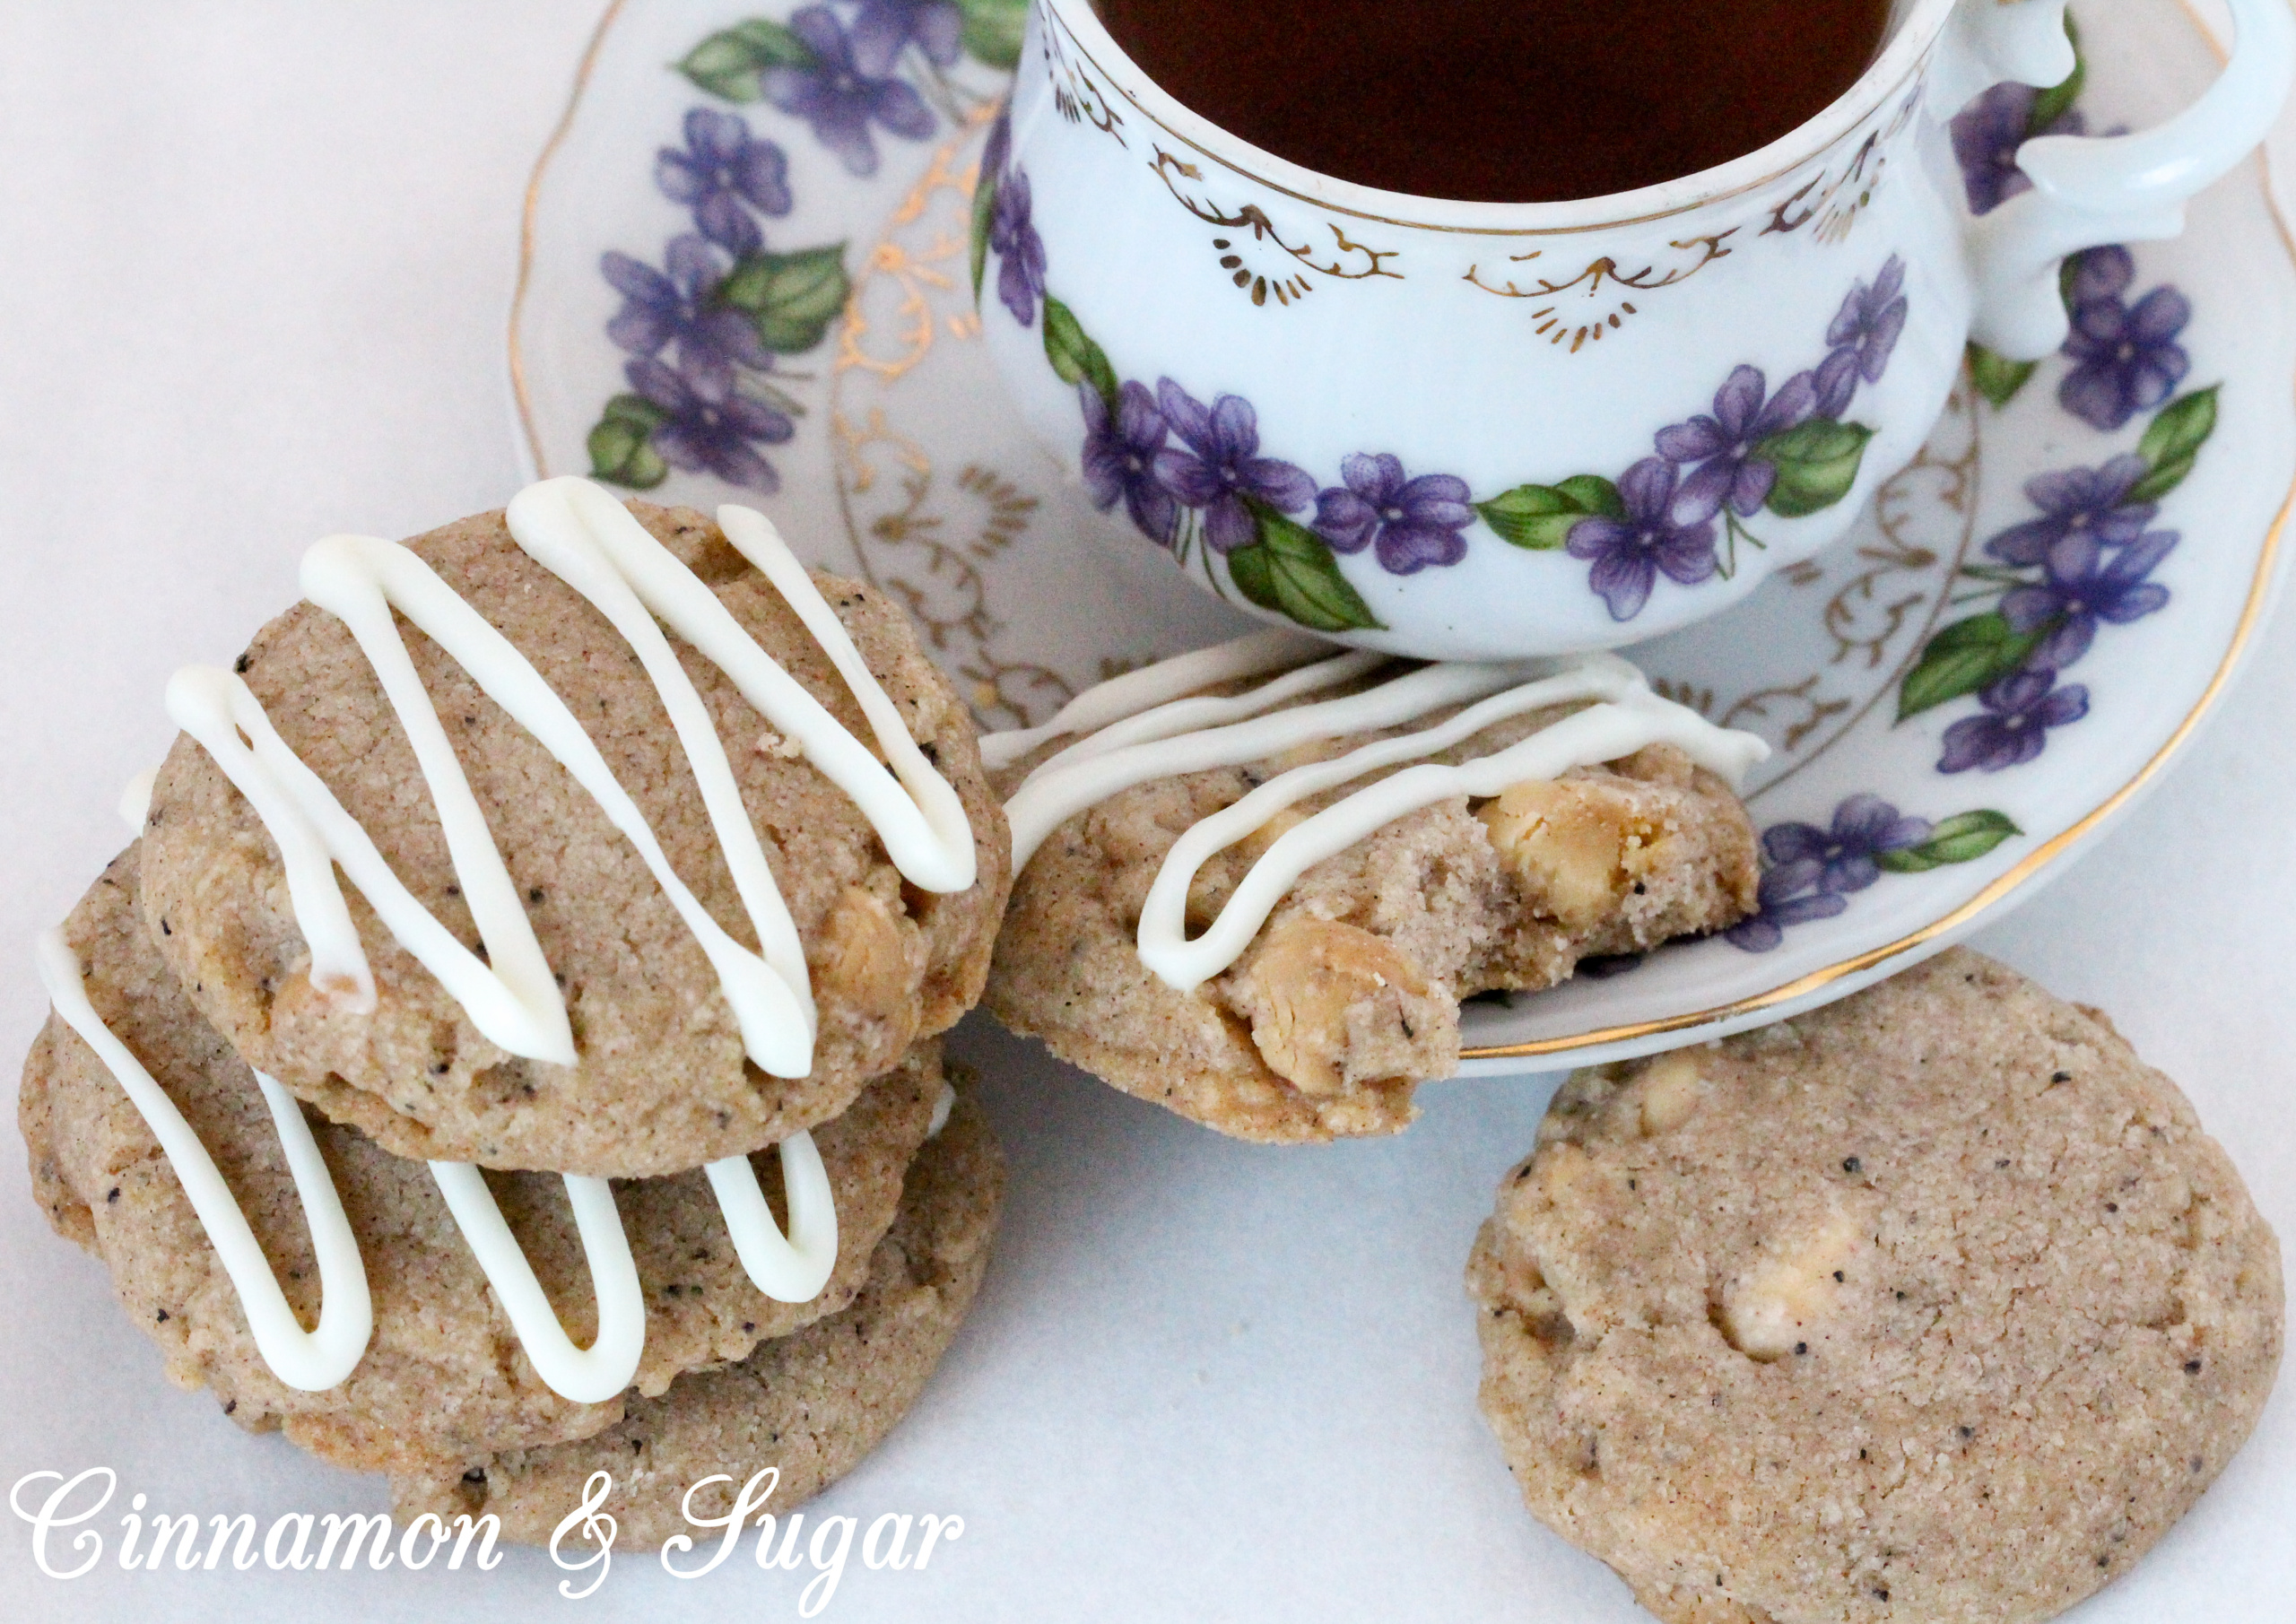 Ginger-Cardamom Tea Cookies are a shortbread-style cookies infused with English Breakfast Tea! Warming spices provide plenty of flavor while white chocolate chips give a burst of creamy sweetness to each bite. Recipe shared with permission granted by Laura Childs, author of LAVENDER BLUE MURDER. 